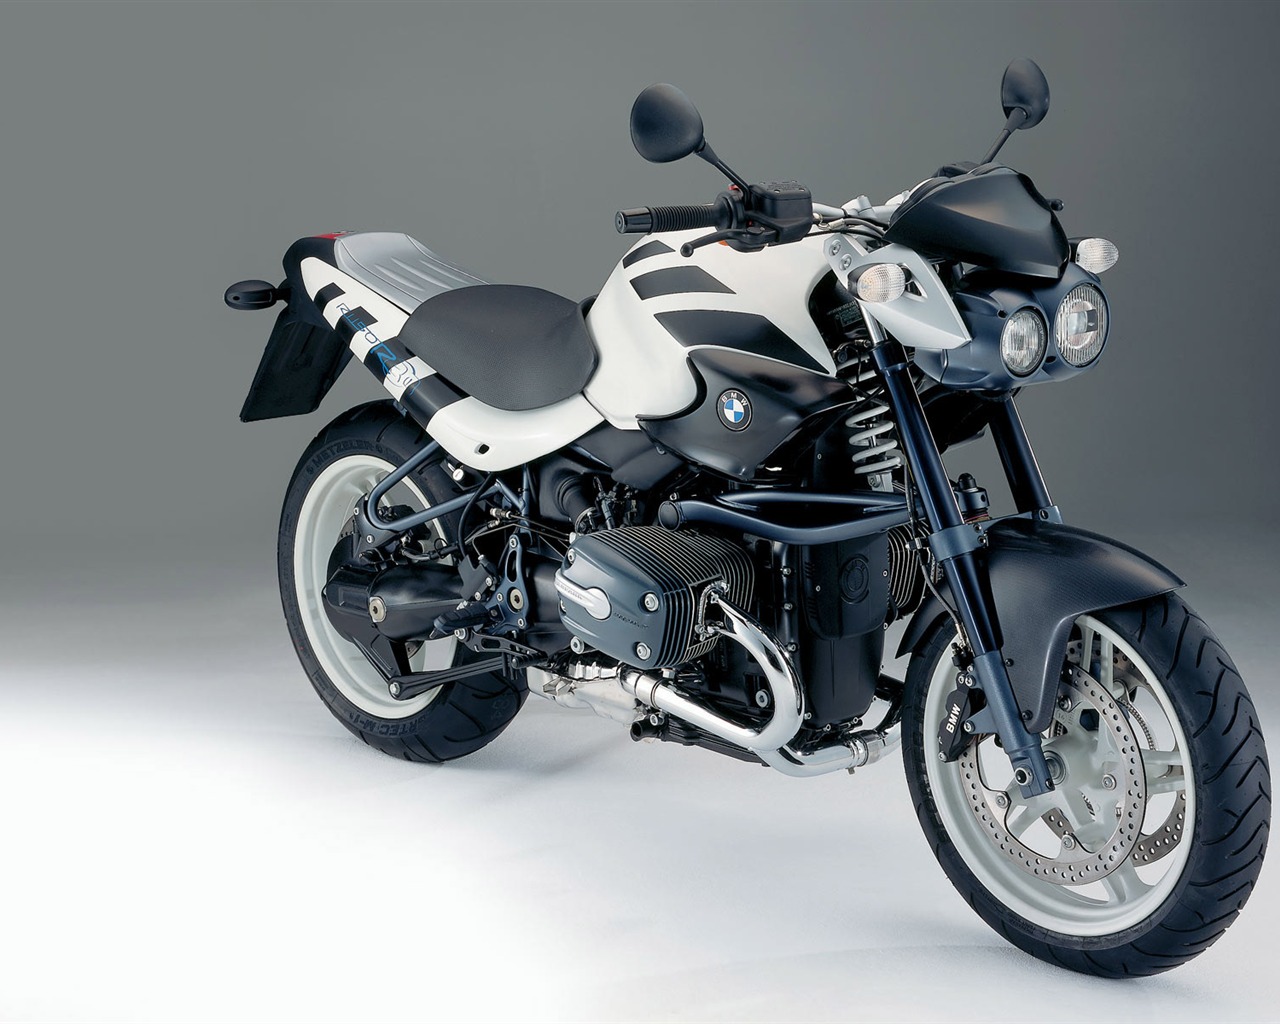 BMW motorcycle wallpapers (2) #3 - 1280x1024